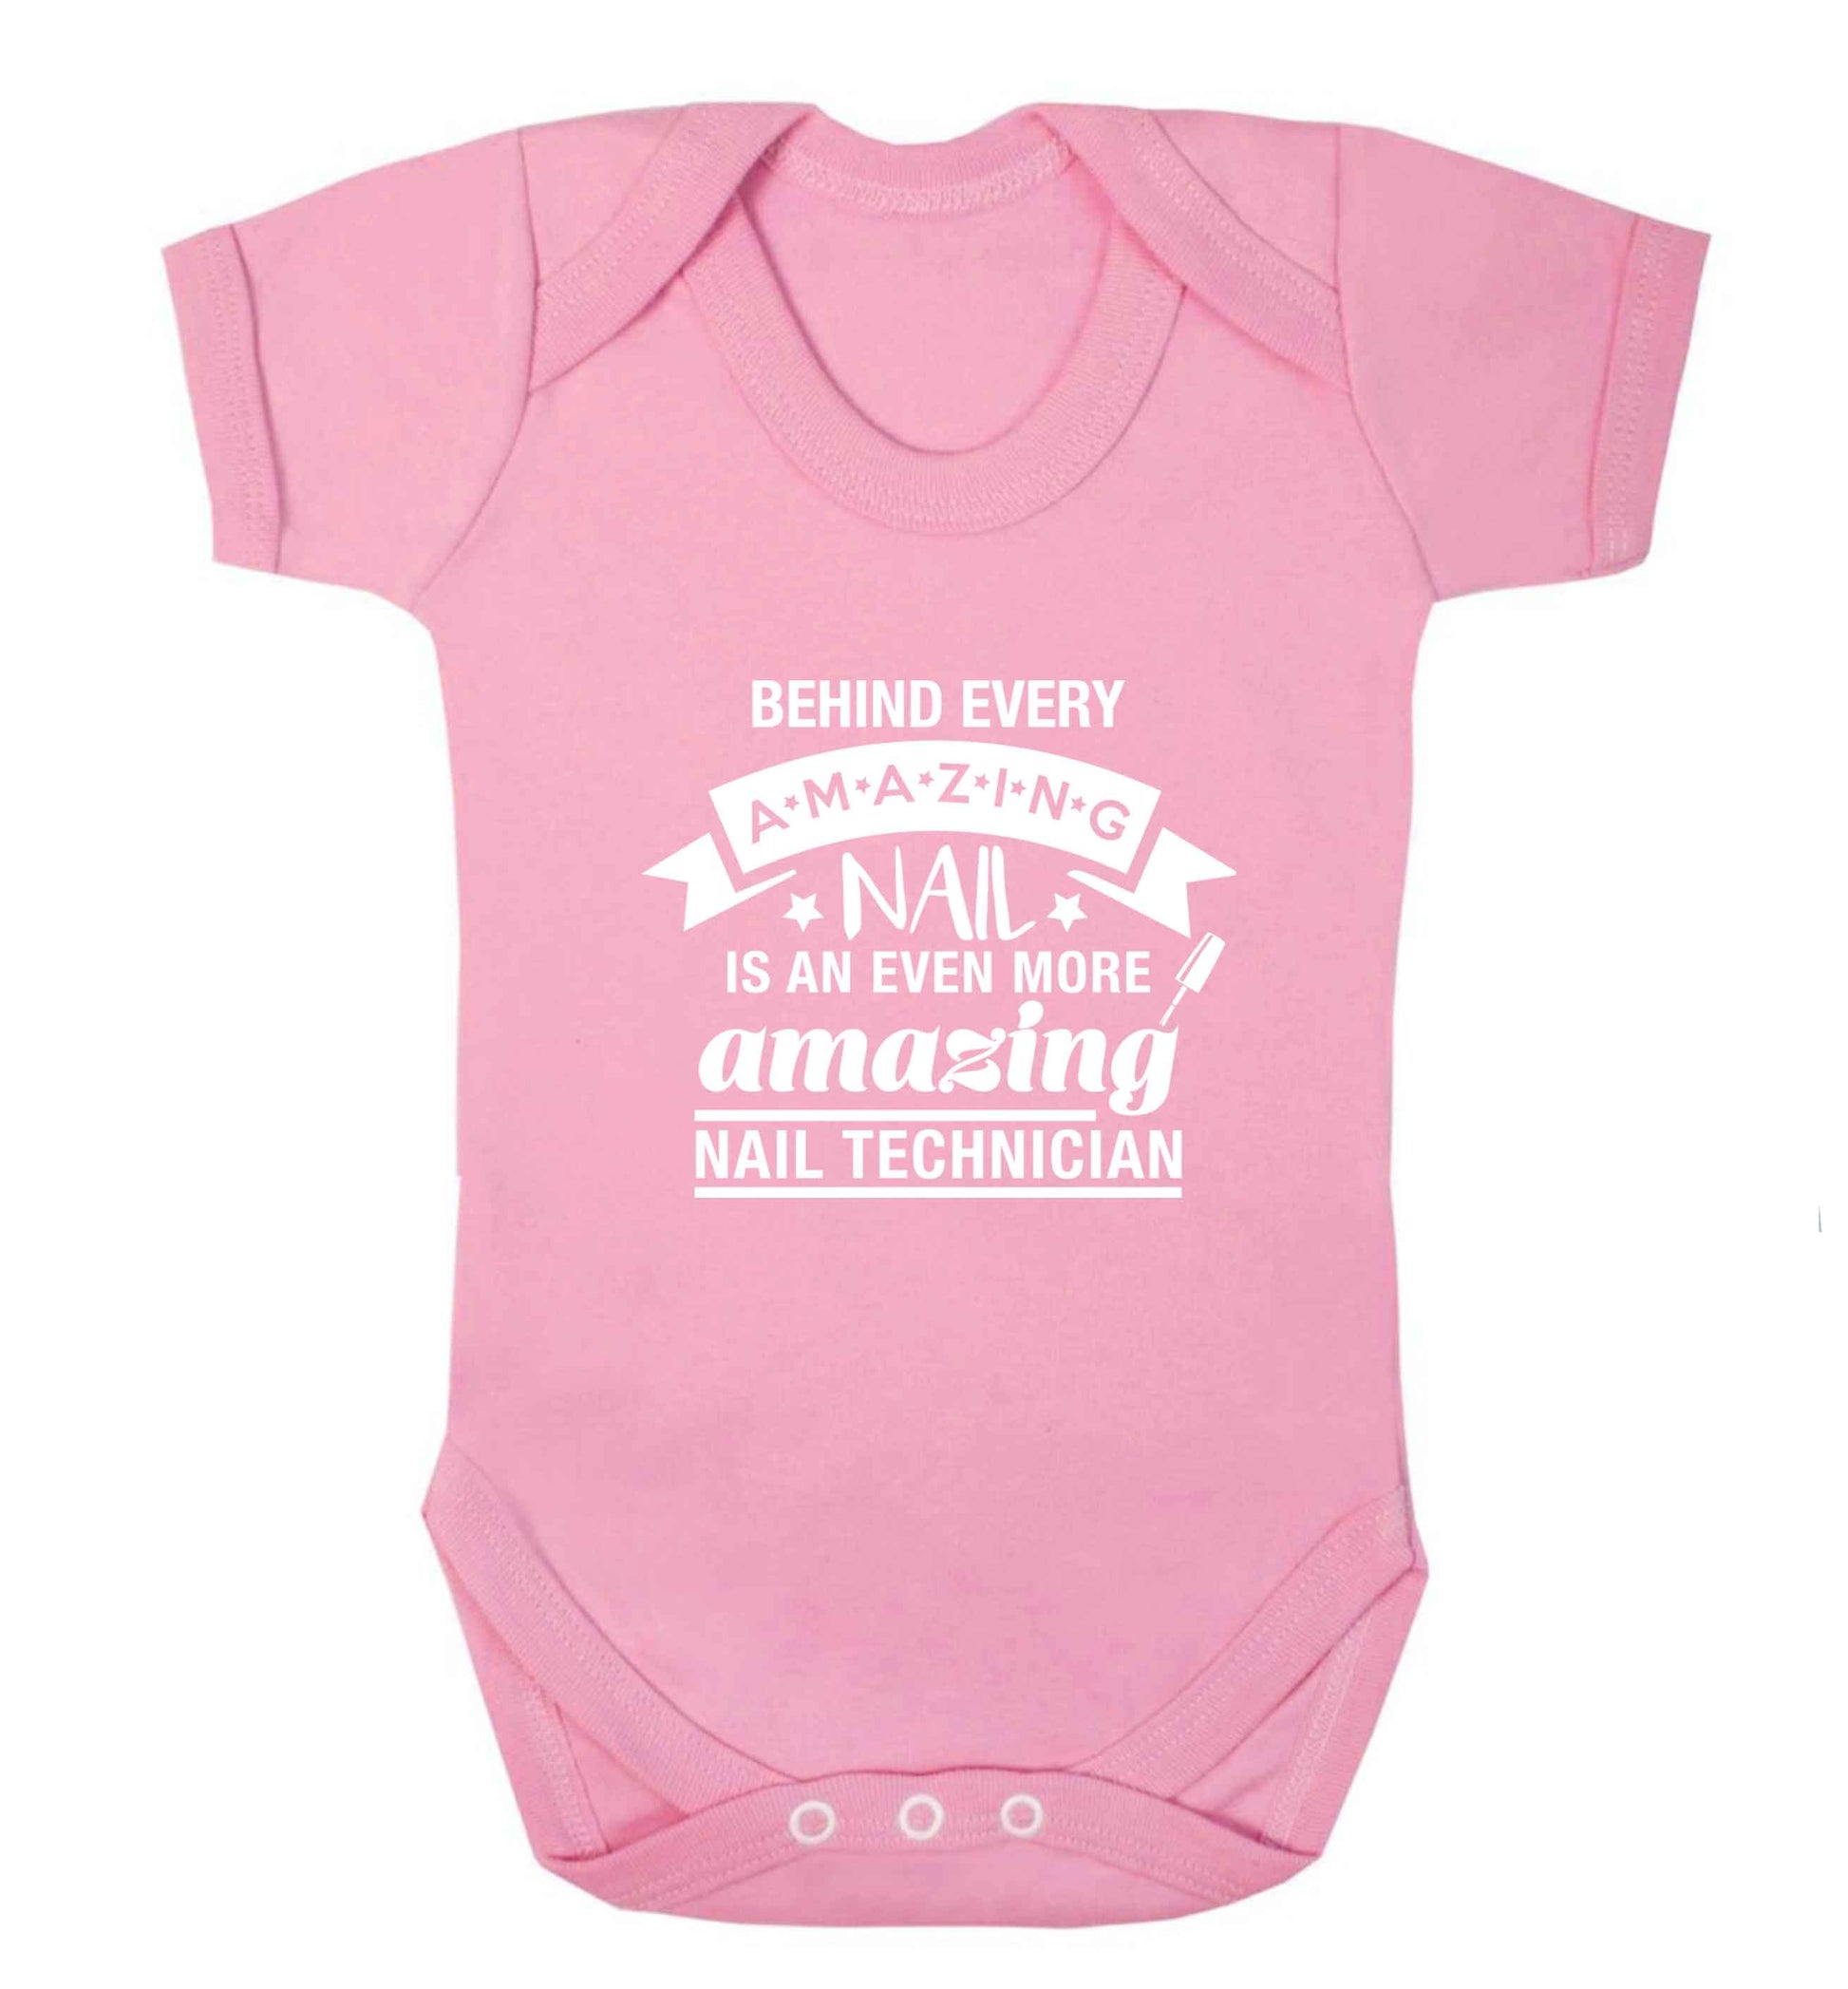 Behind every amazing nail is an even more amazing nail technician baby vest pale pink 18-24 months